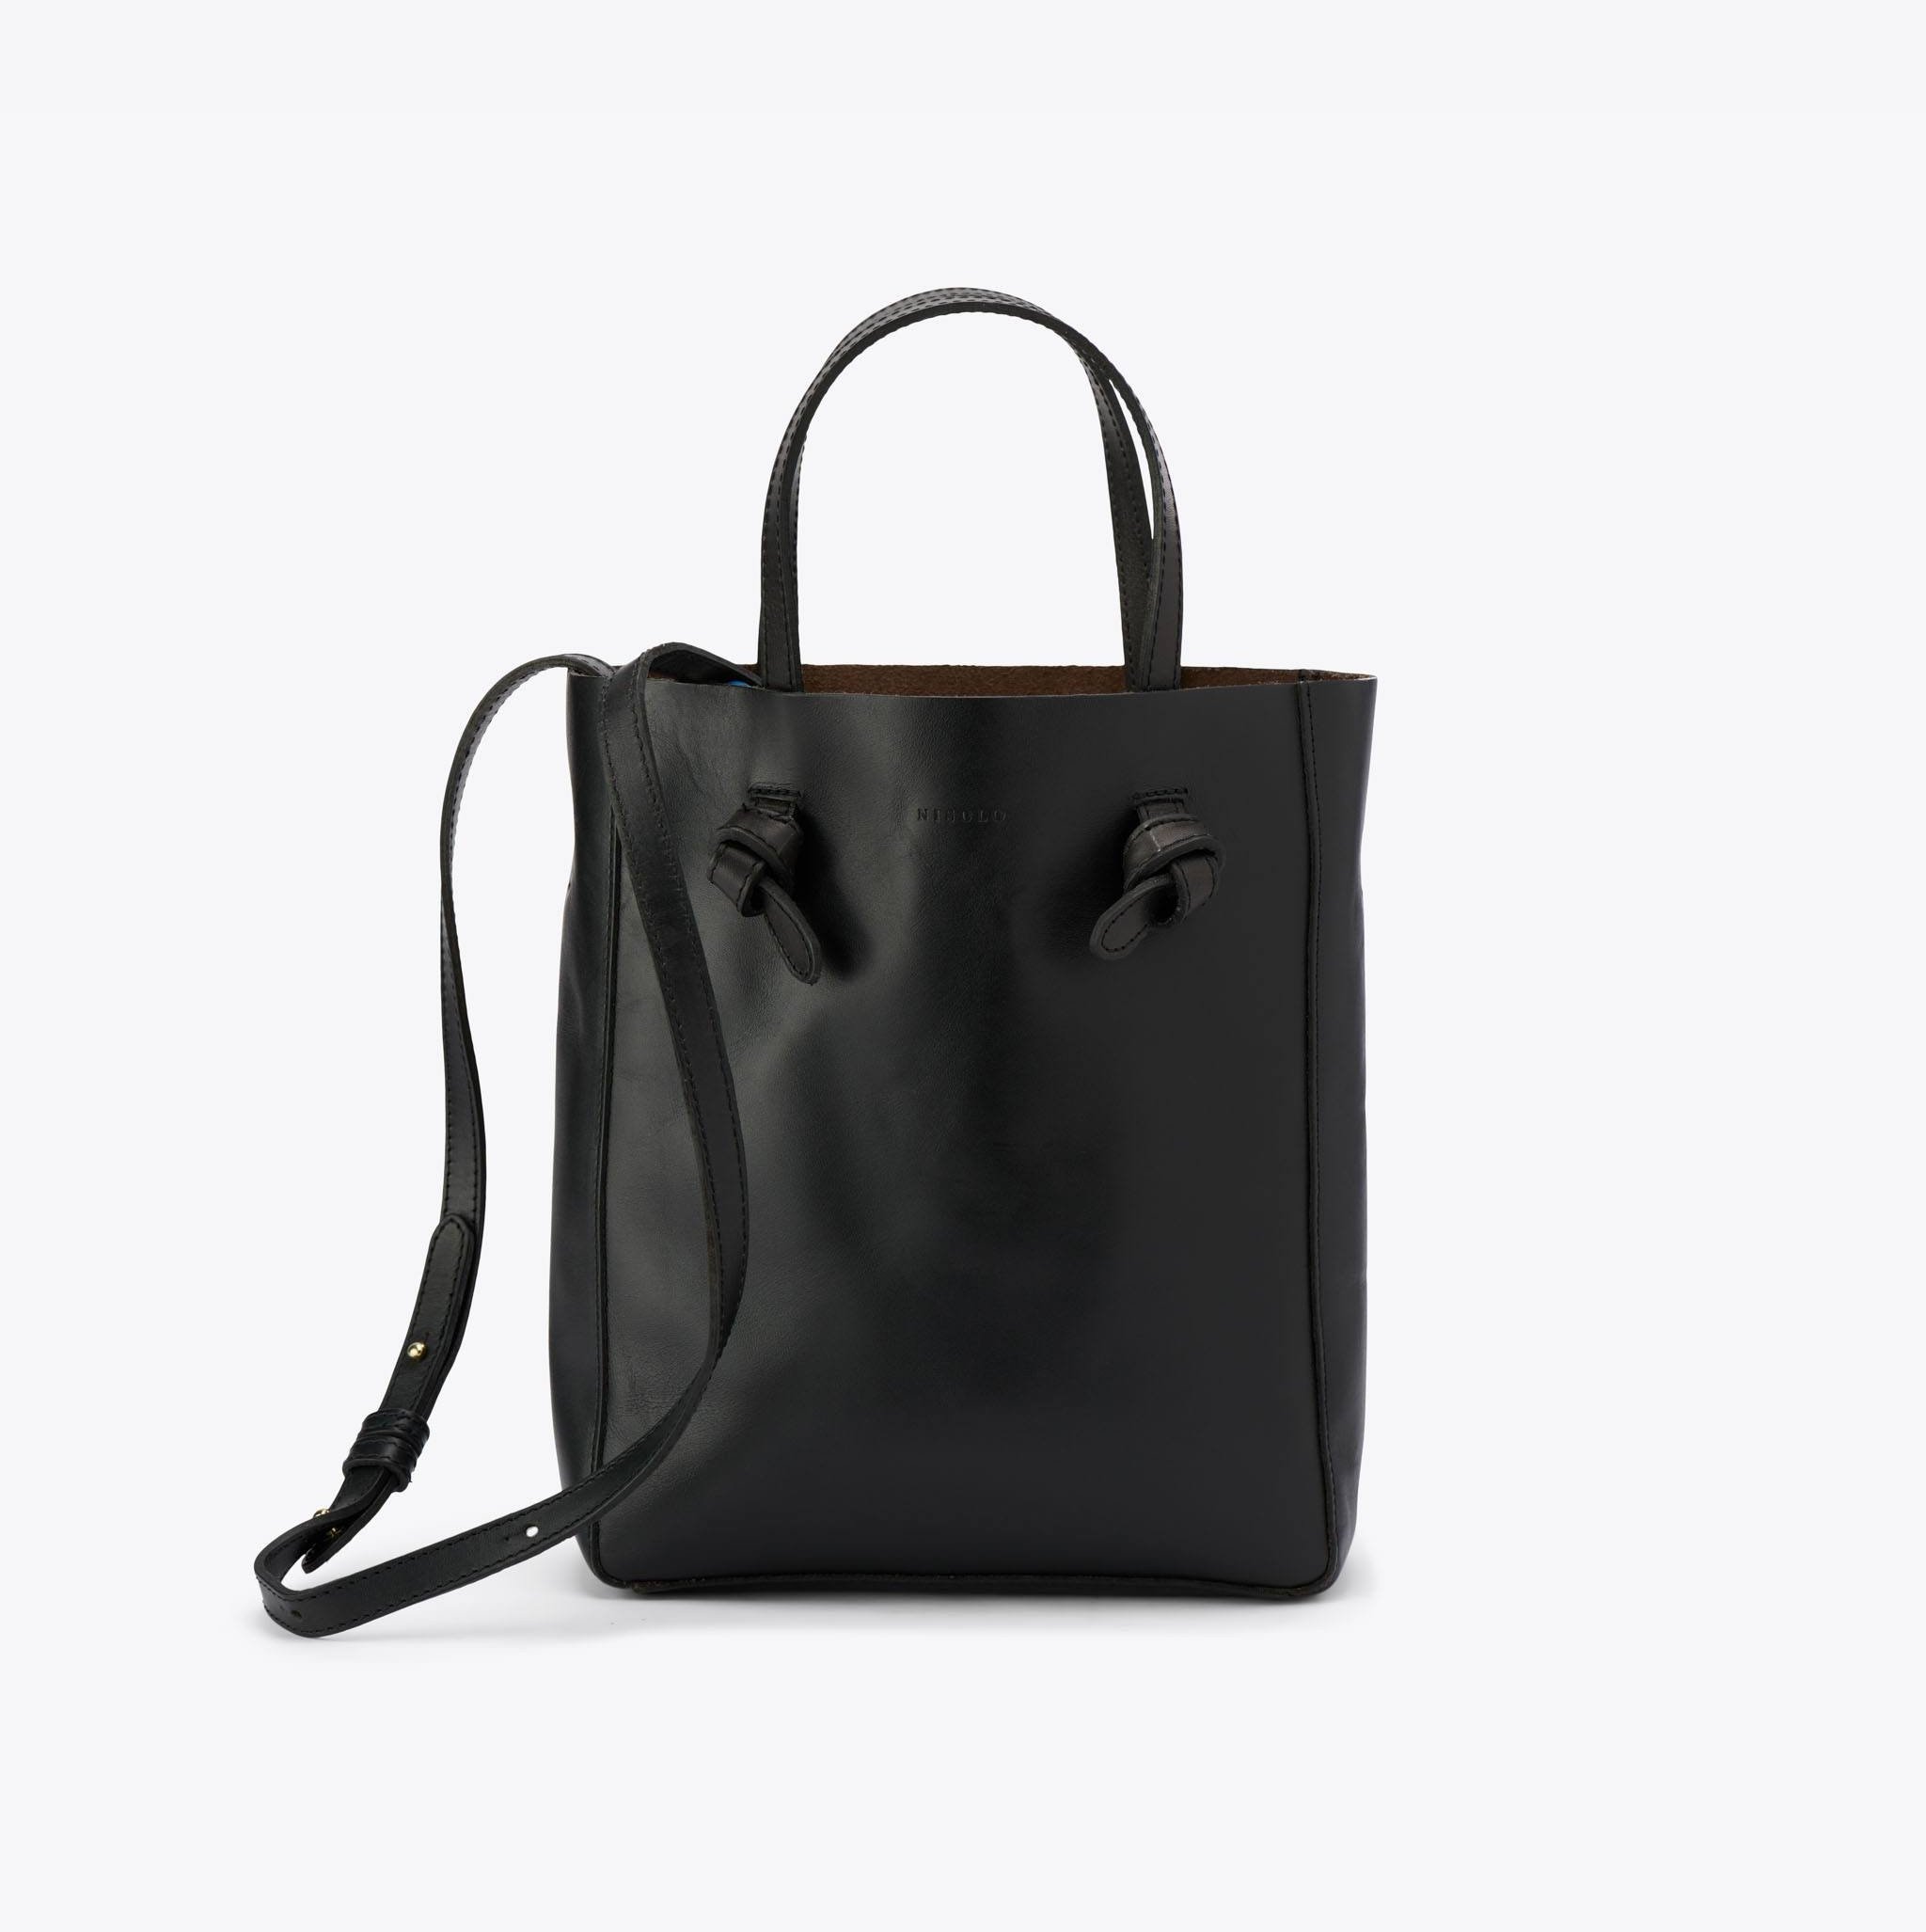 Nisolo Simone Convertible Shopper Black - Every Nisolo product is built on the foundation of comfort, function, and design. 